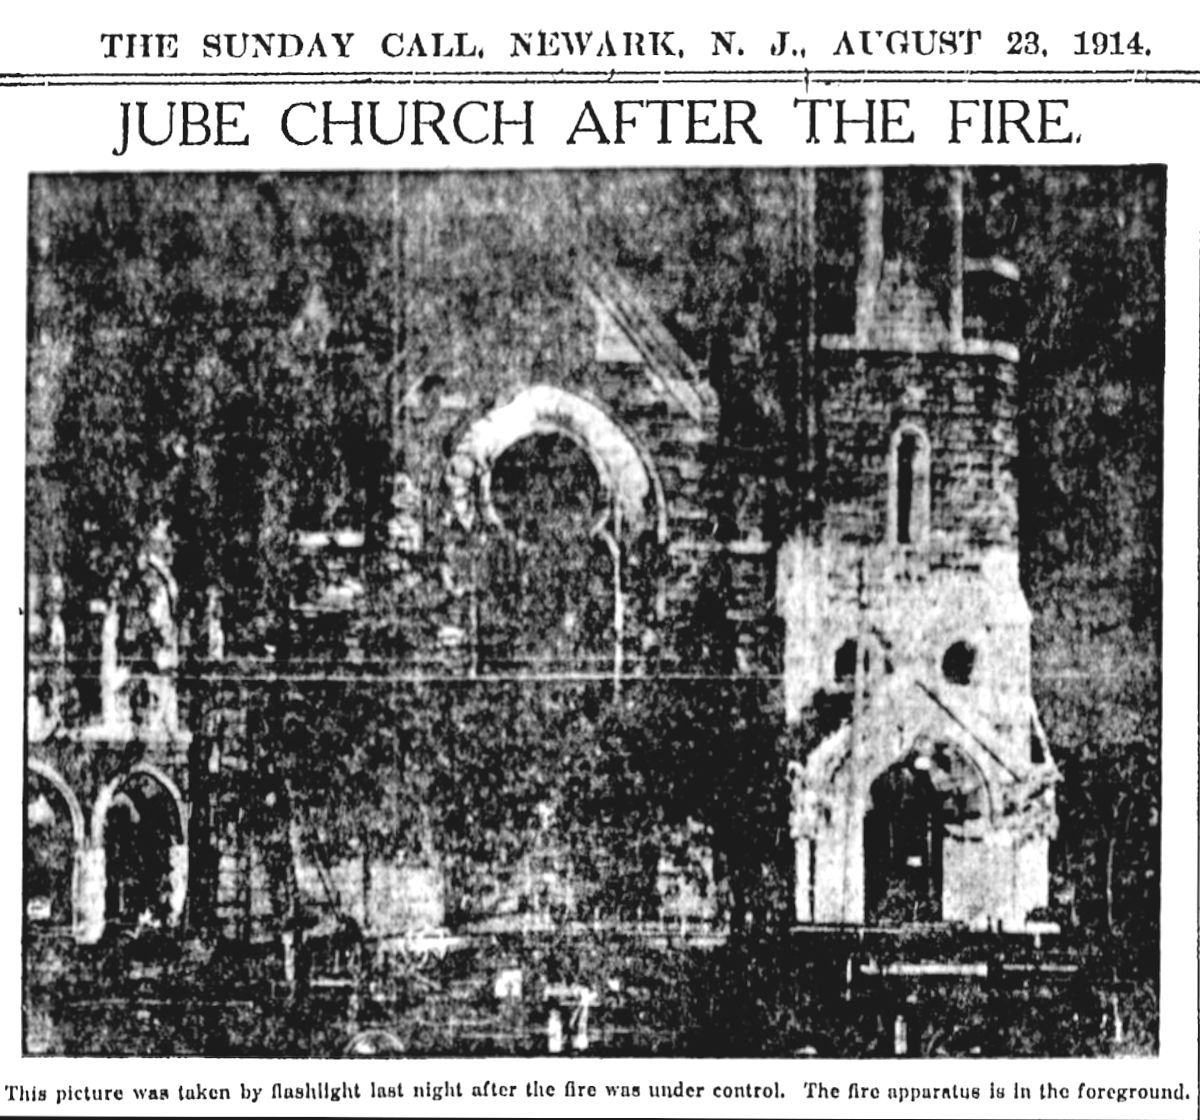 Jube Church after the Fire
1914
